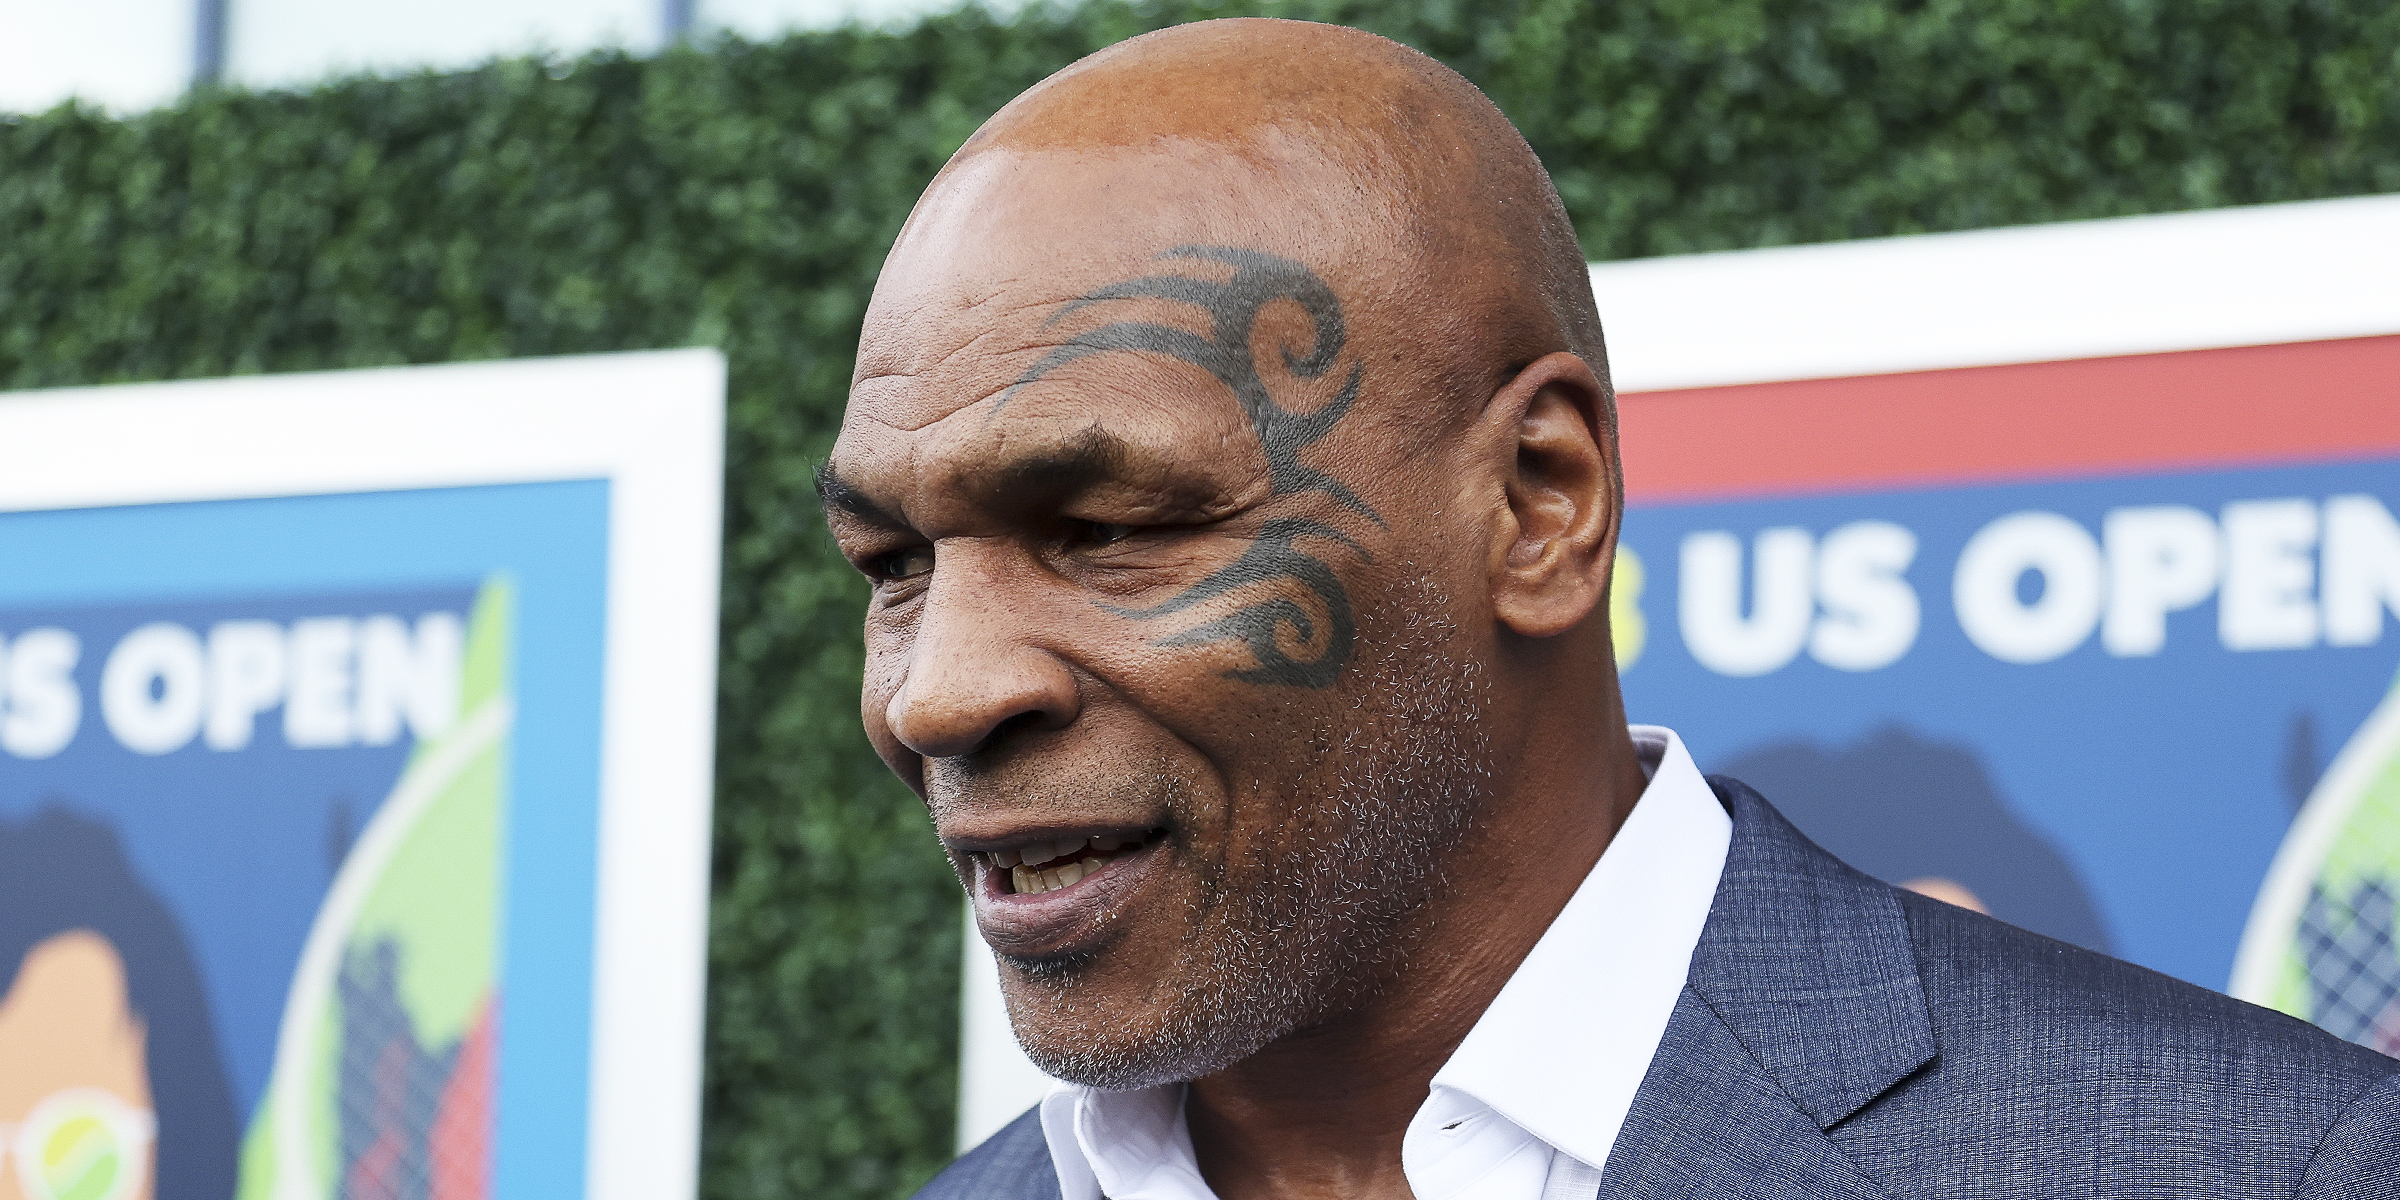 Mike Tyson | Source: Getty Images